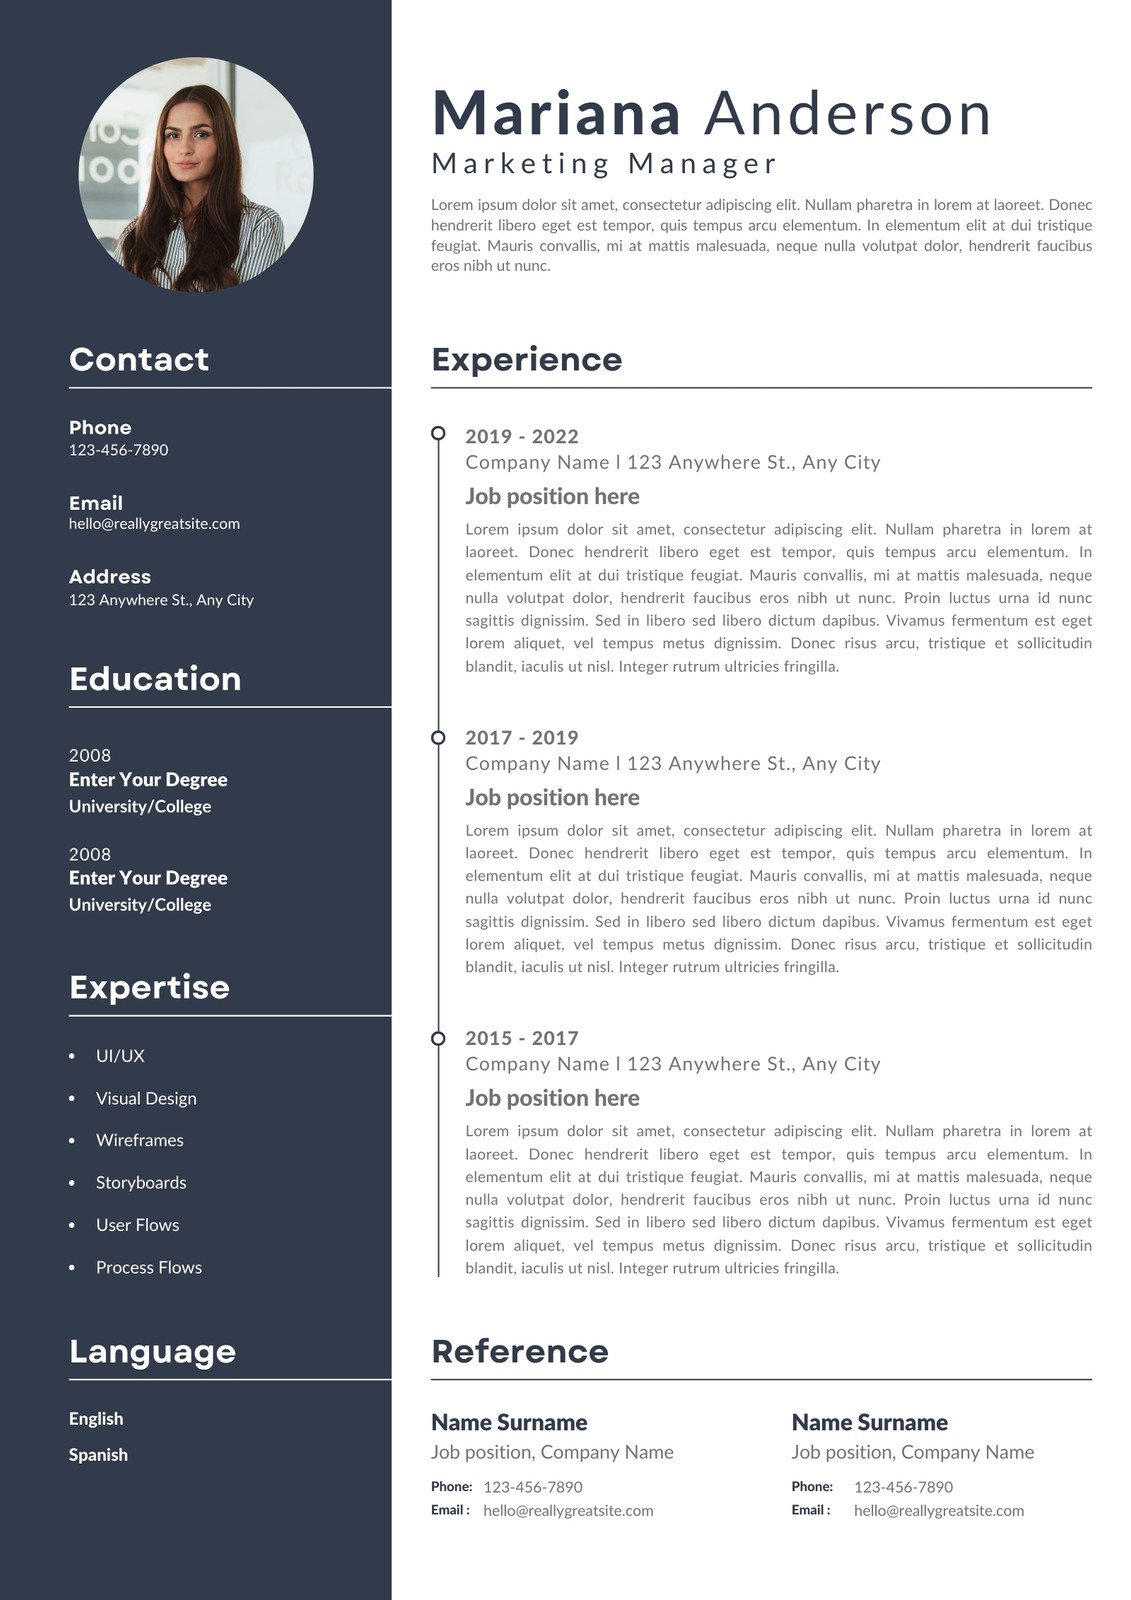 Free professional simple resume templates to customize | Canva